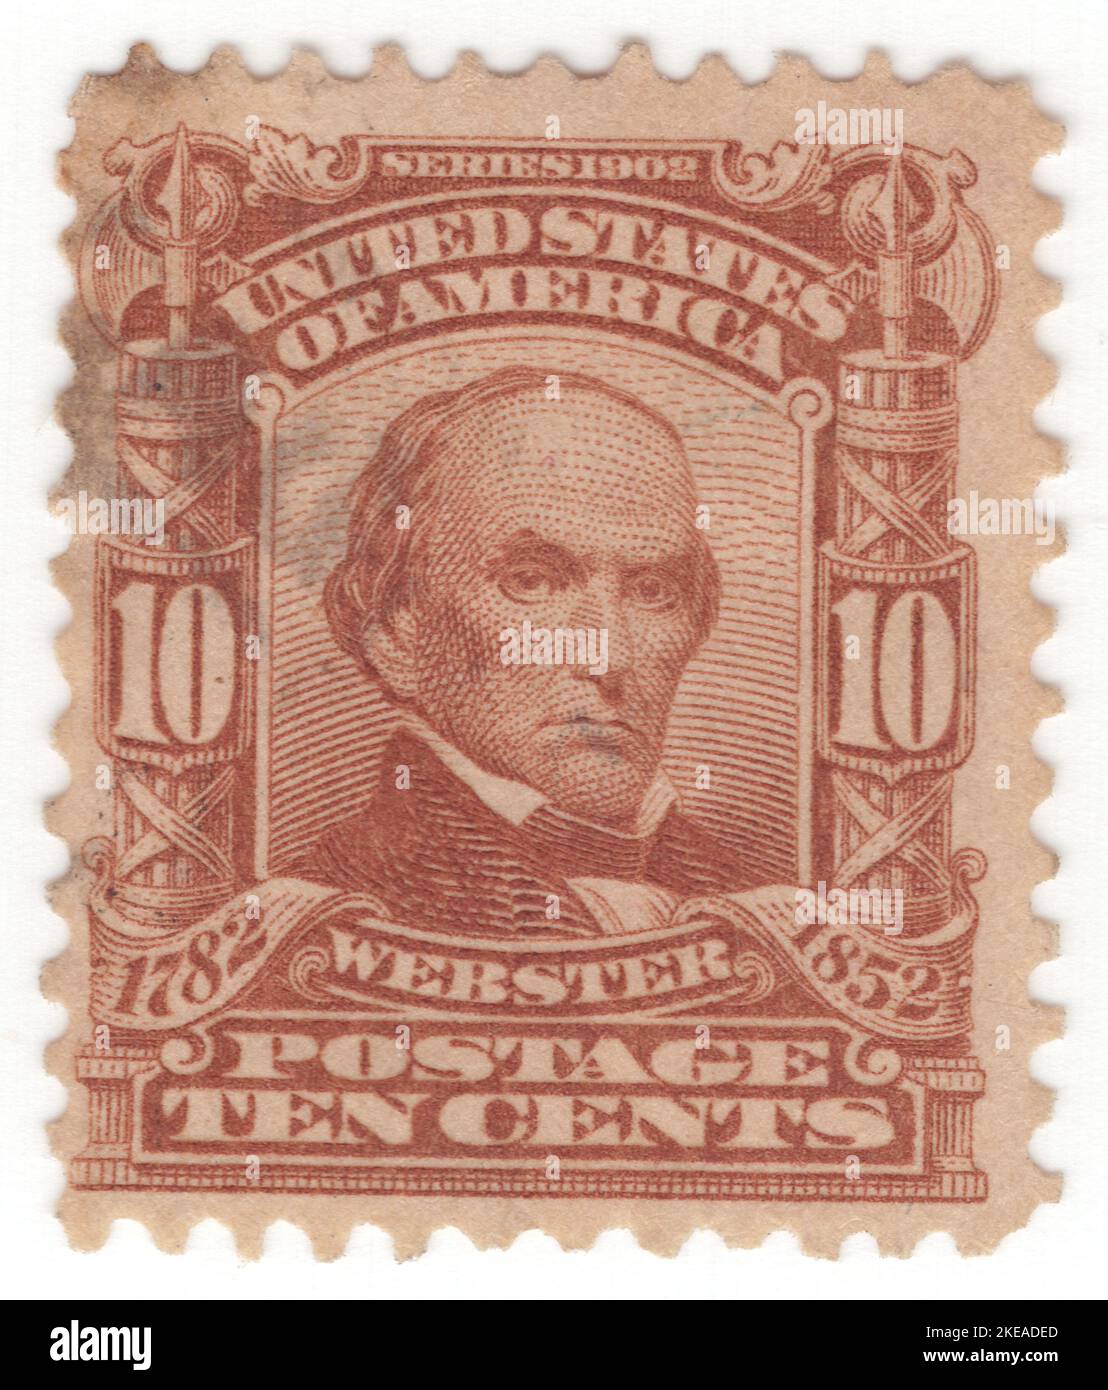 USA - 1903: An 10 cents pale red-brown postage stamp depicting portrait of Daniel Webster, American lawyer and statesman who represented New Hampshire and Massachusetts in the U.S. Congress and served as the U.S. Secretary of State under Presidents William Henry Harrison, John Tyler, and Millard Fillmore. Webster was one of the most prominent American lawyers of the 19th century, and argued over 200 cases before the U.S. Supreme Court between 1814 and his death in 1852. During his life, he was a member of the Federalist Party, the National Republican Party, and the Whig Party Stock Photo